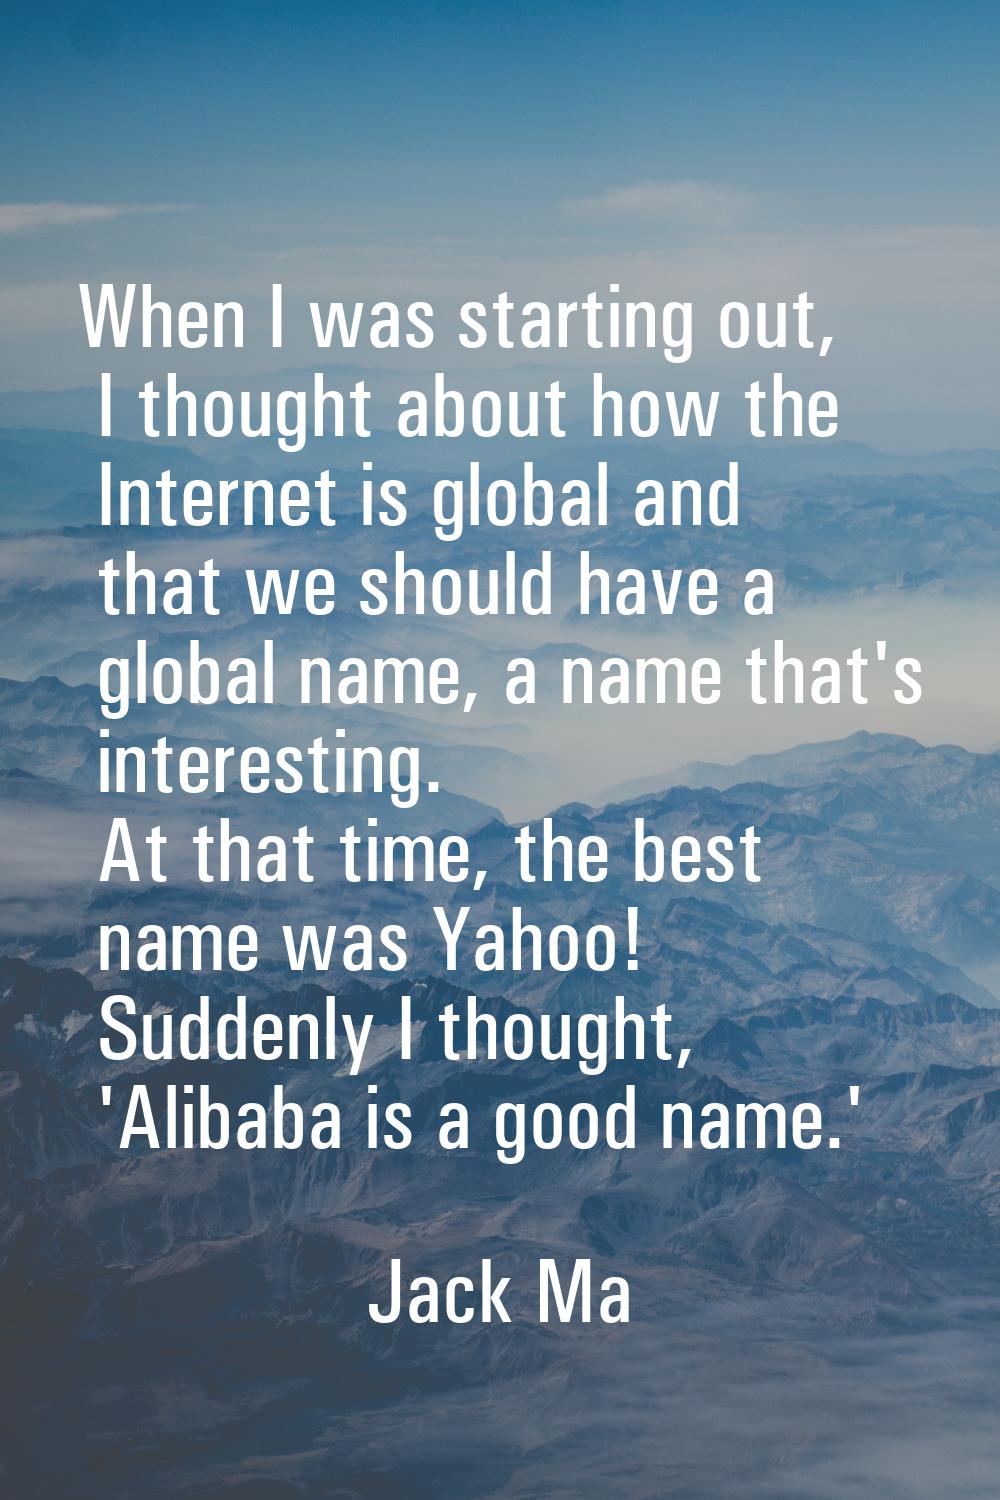 When I was starting out, I thought about how the Internet is global and that we should have a globa